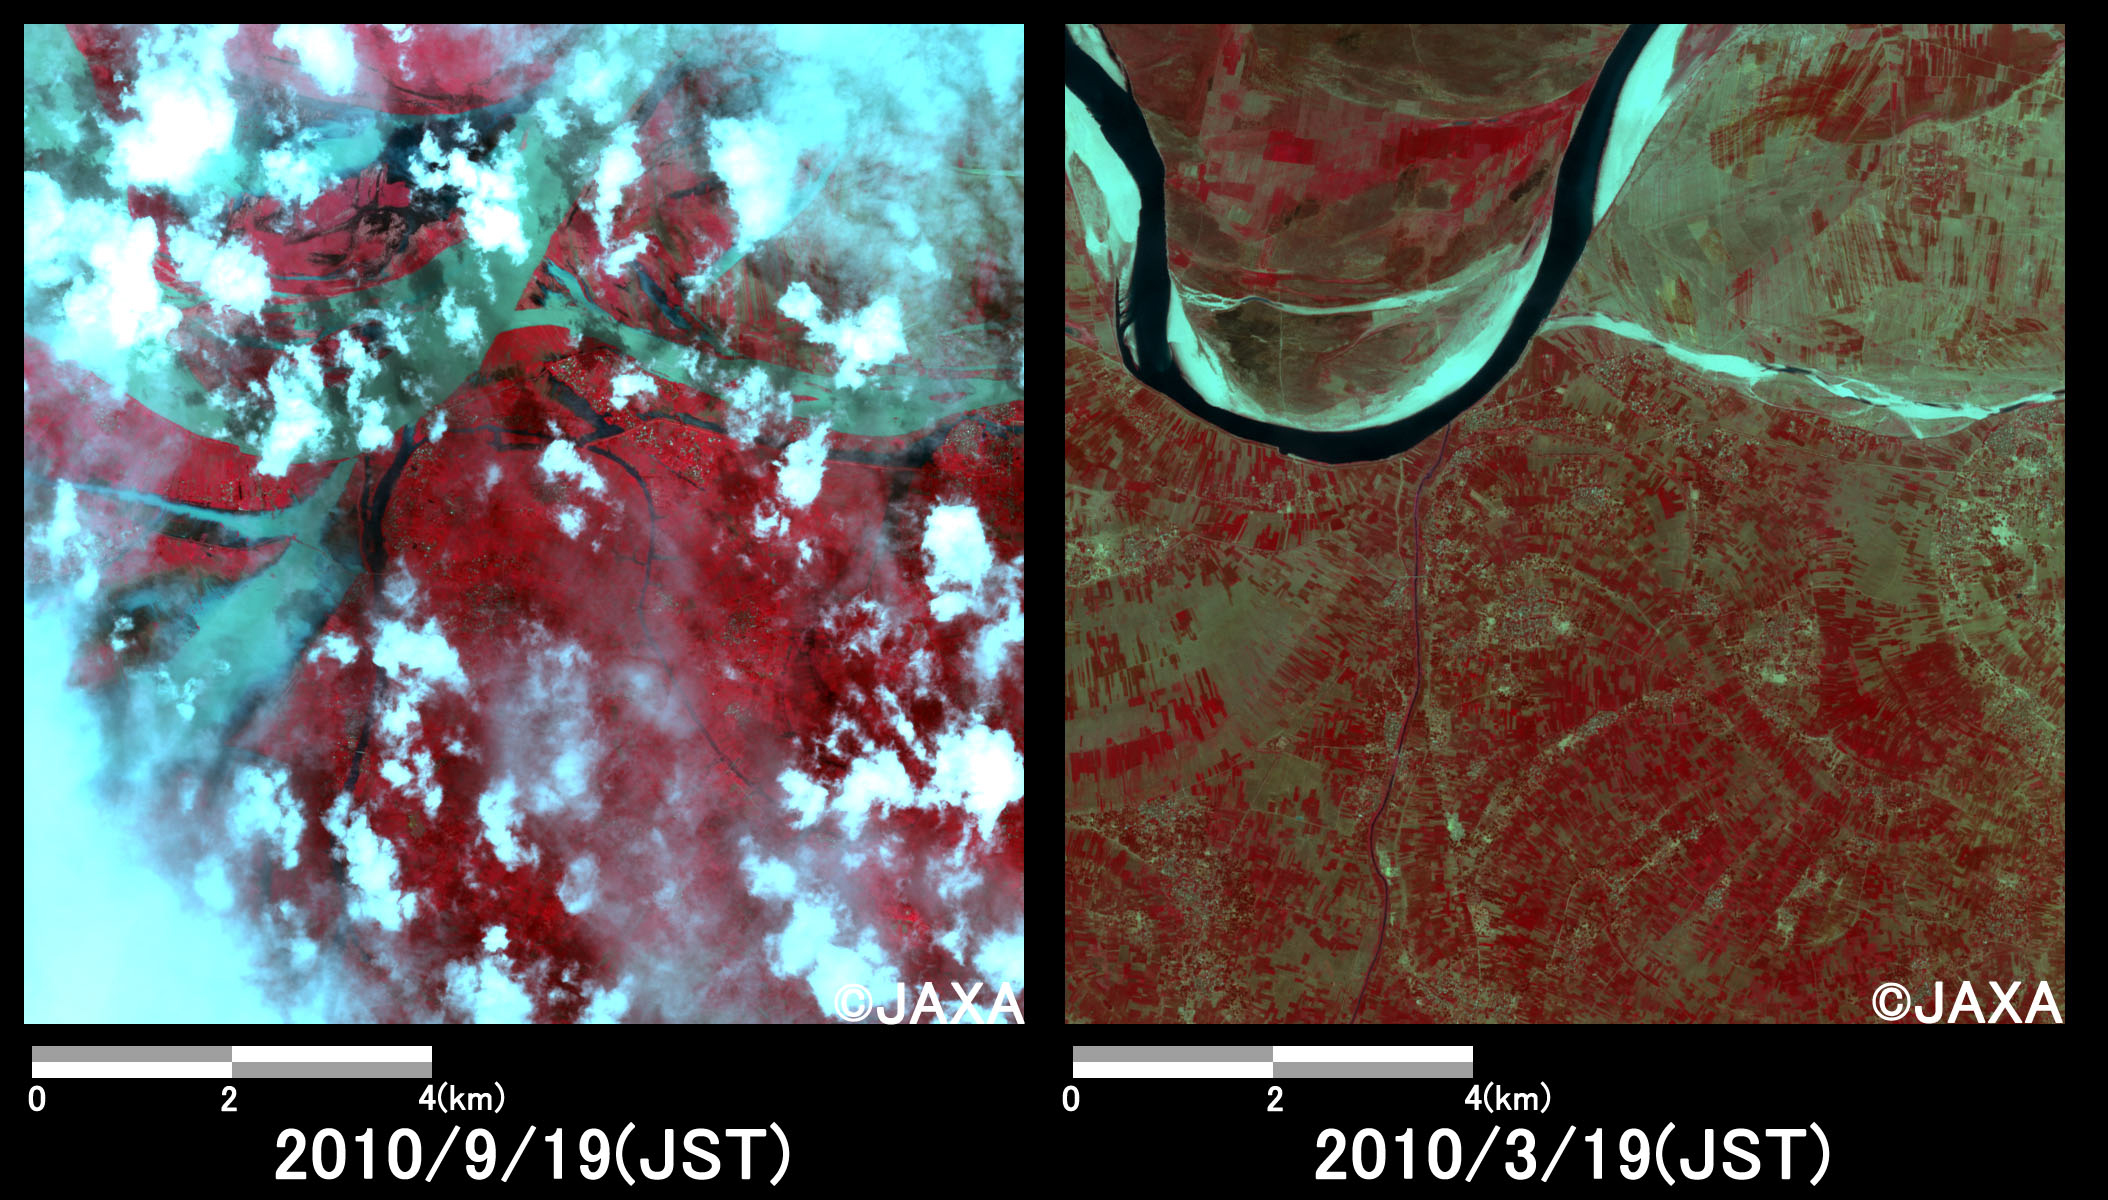 Fig. 2: Enlarged images at the swollen river at Semaria (100 square kilometers, left: September 19, 2010; right: March 19, 2010).